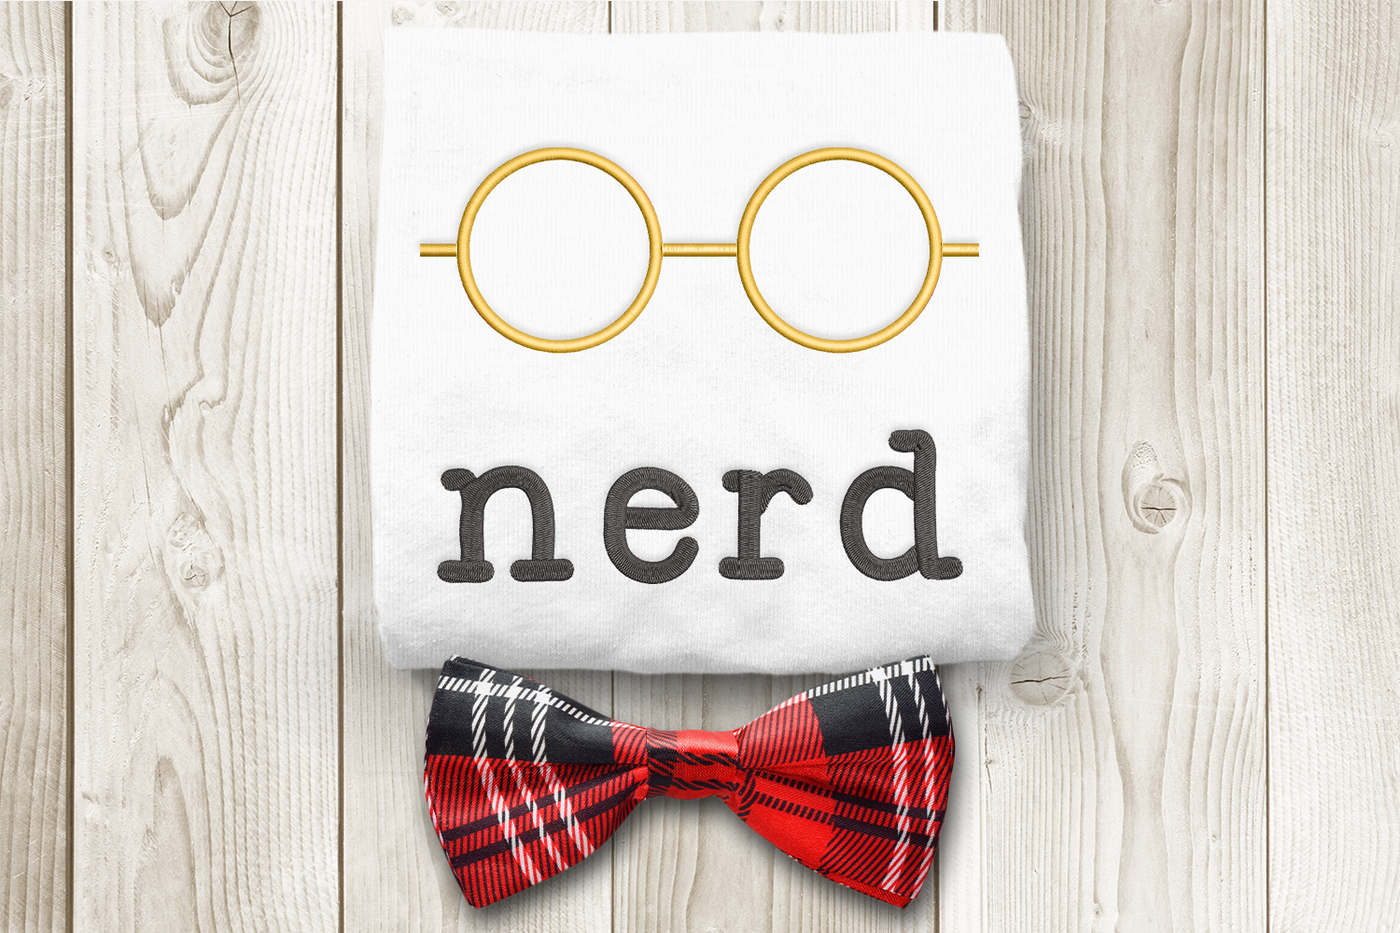 Embroidery design of round glasses with the word "nerd" below. 